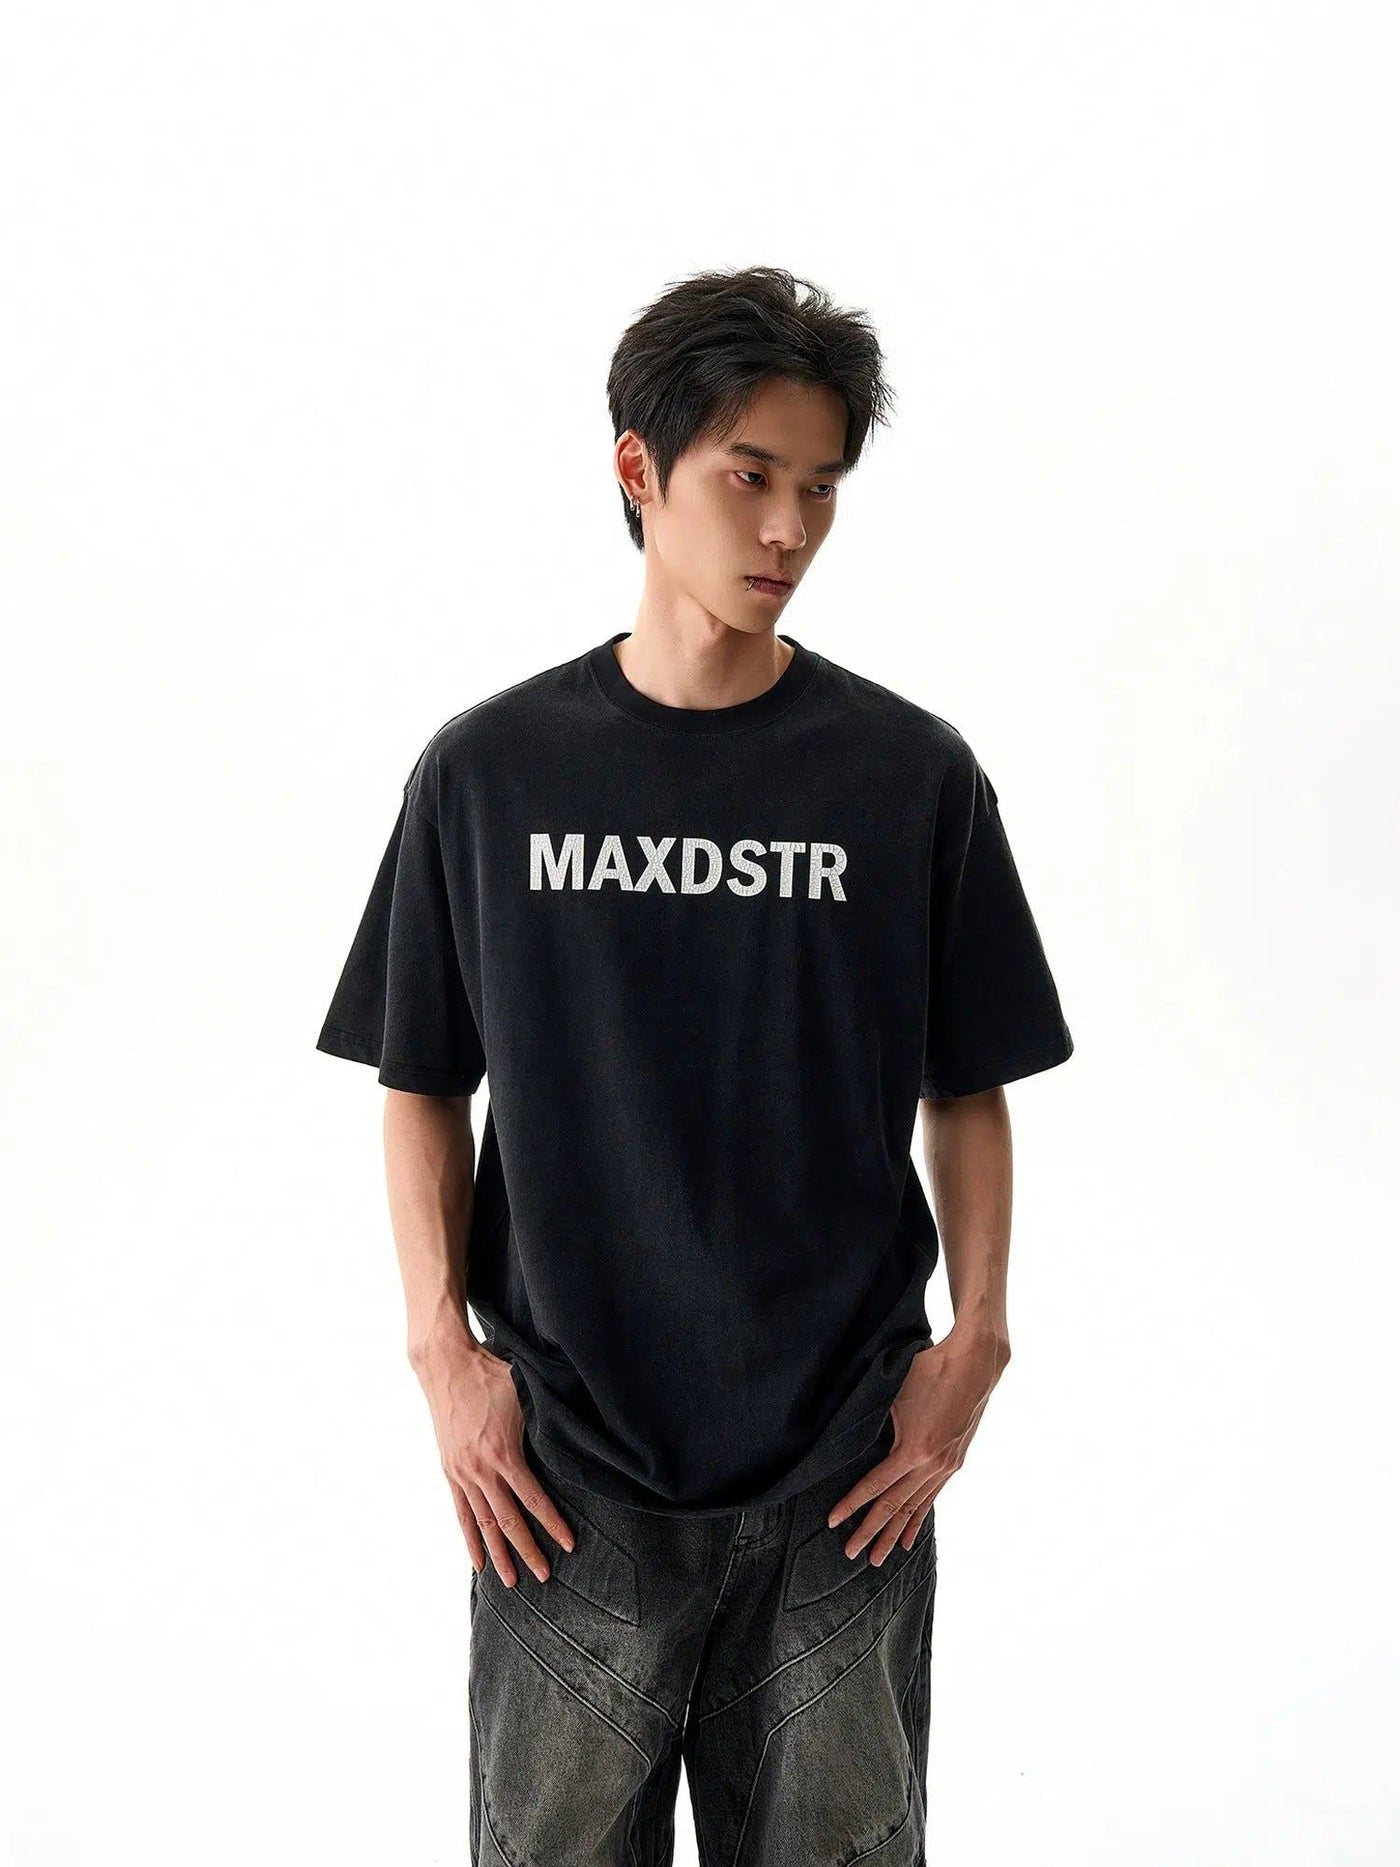 Basic Cracked Letters T-Shirt Korean Street Fashion T-Shirt By MaxDstr Shop Online at OH Vault